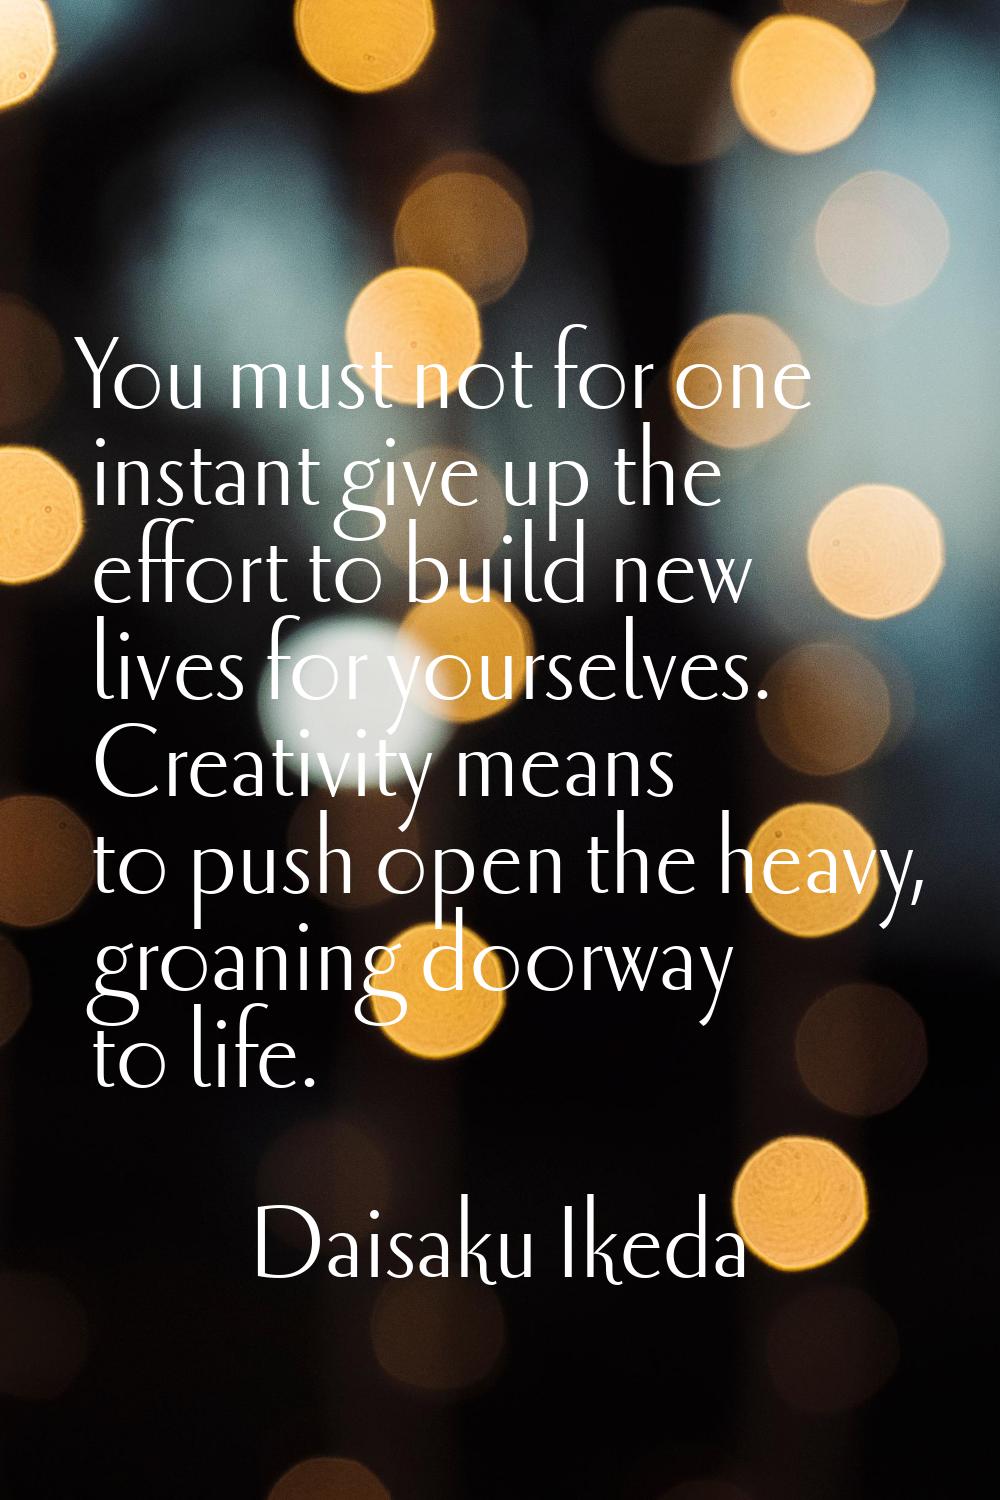 You must not for one instant give up the effort to build new lives for yourselves. Creativity means